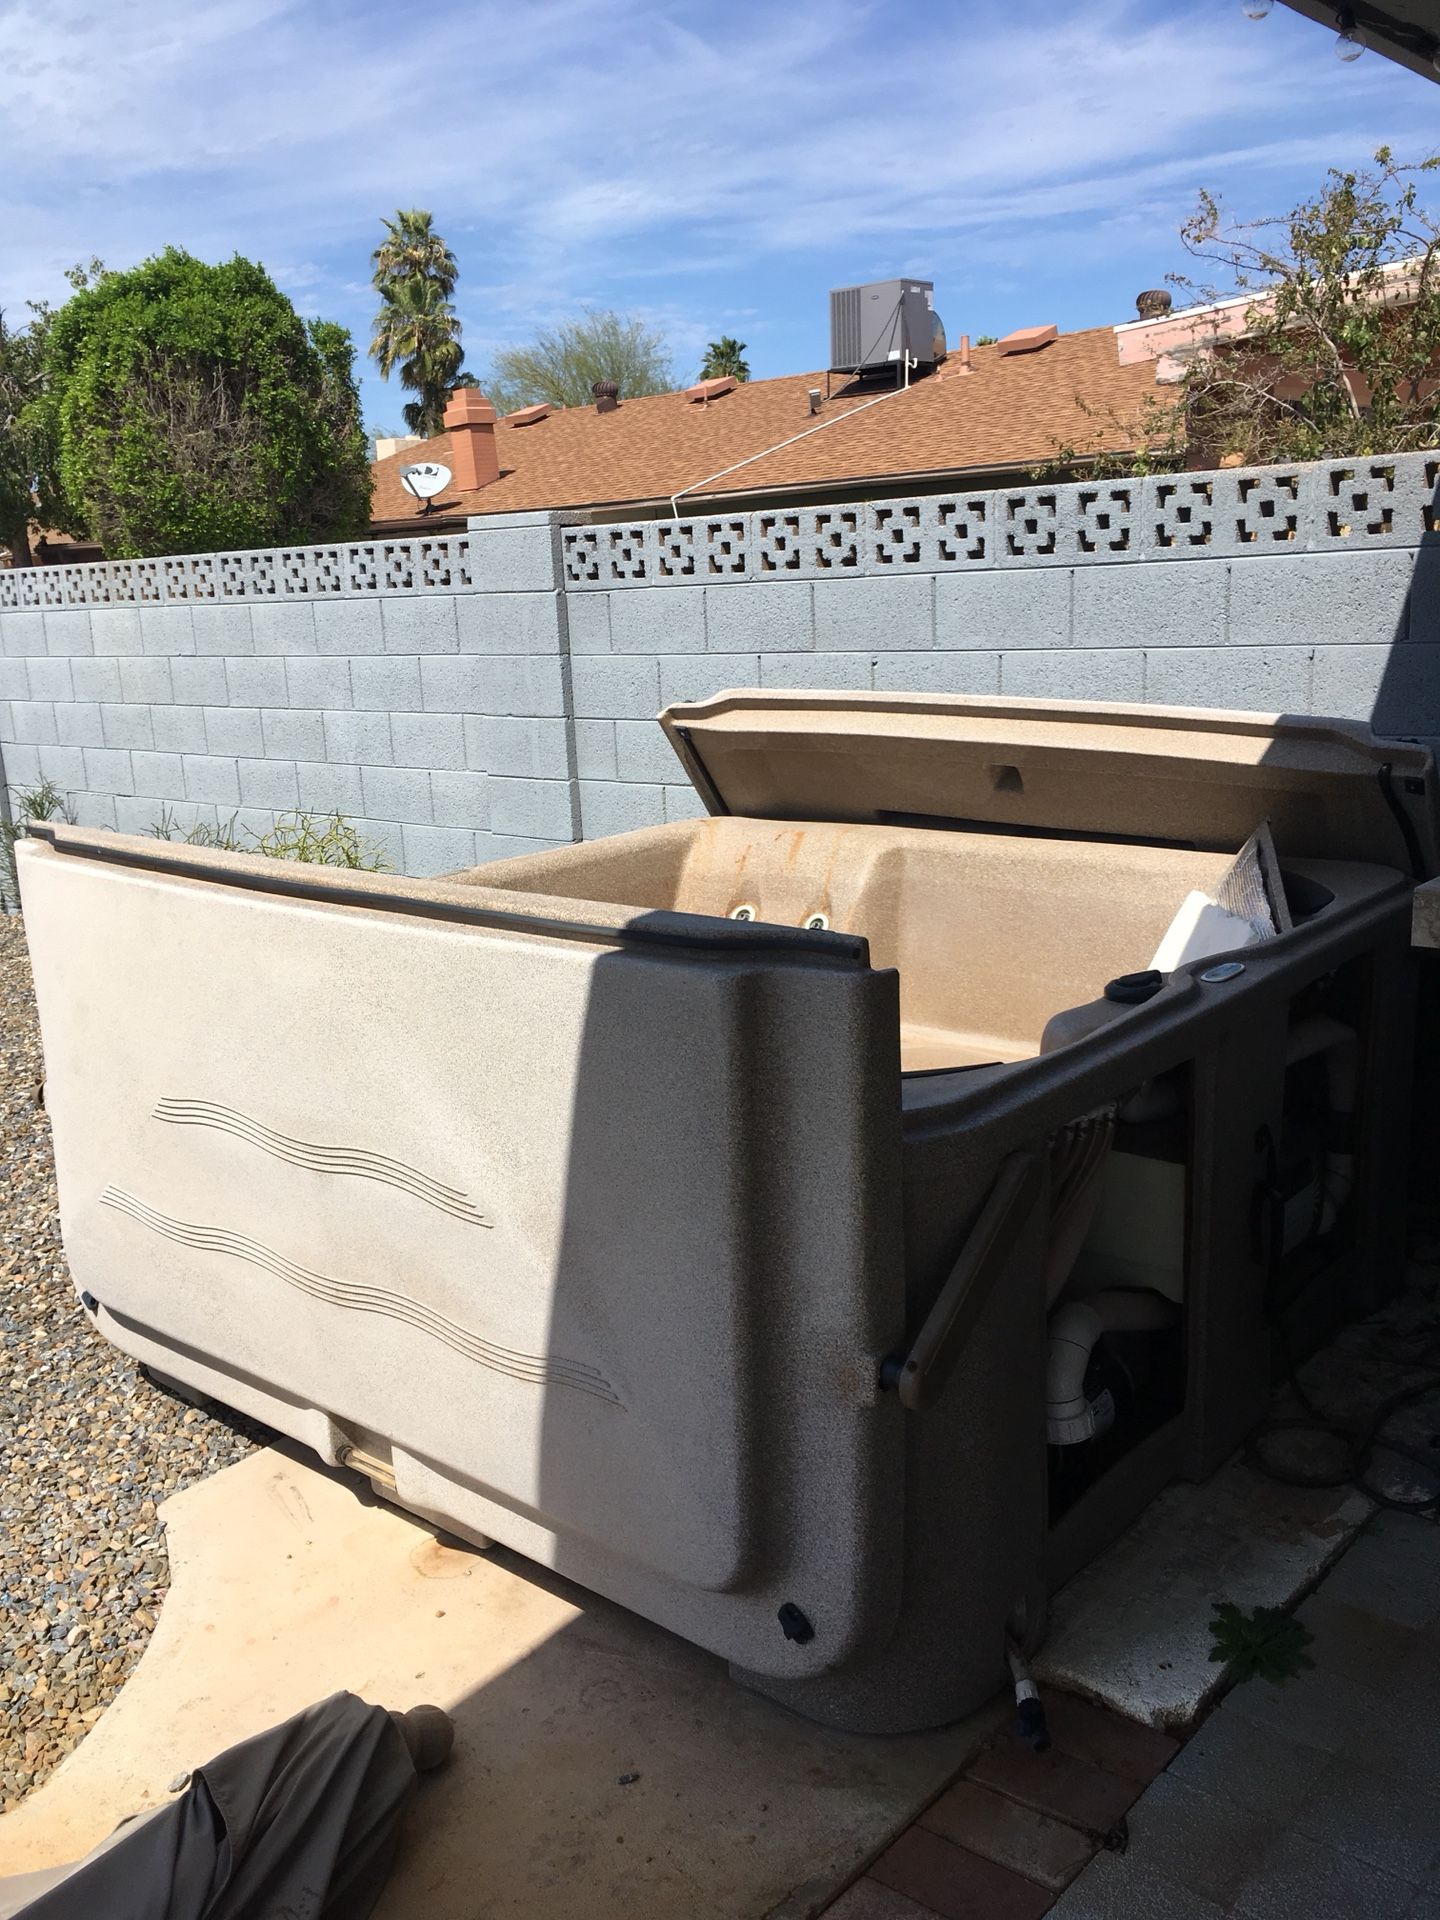 South Pacific Spas Hot Tub - needs to be cleaned and jets sealed